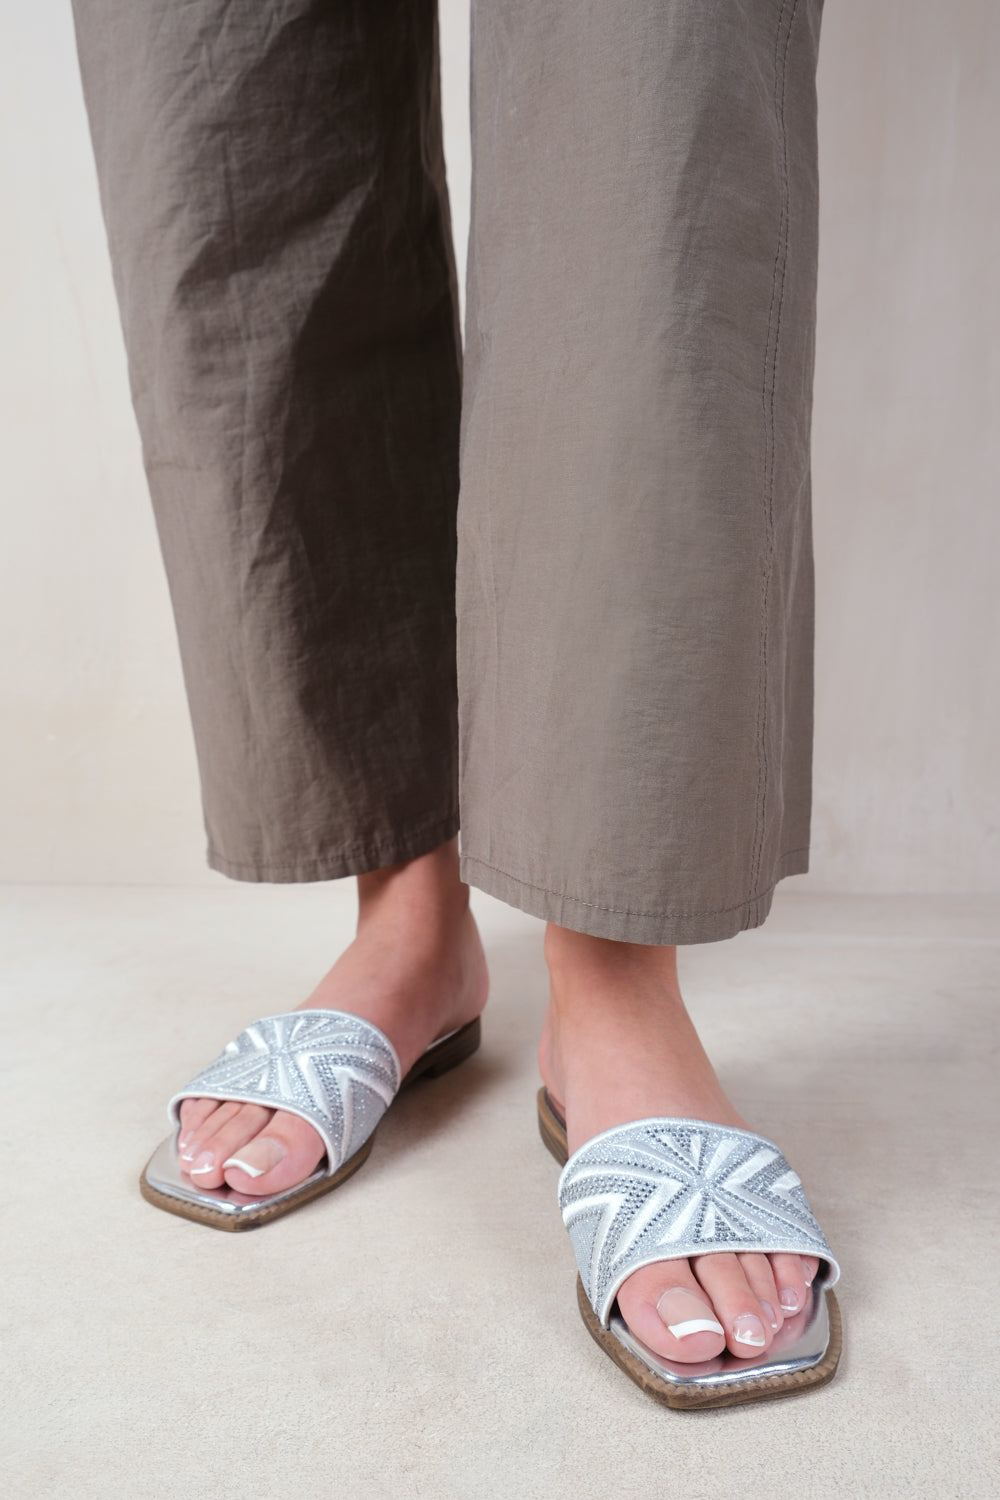 BLOSSOM FLAT SANDALS WITH SPARKLY TEXTURED SINGLE BAND IN SILVER METALLIC